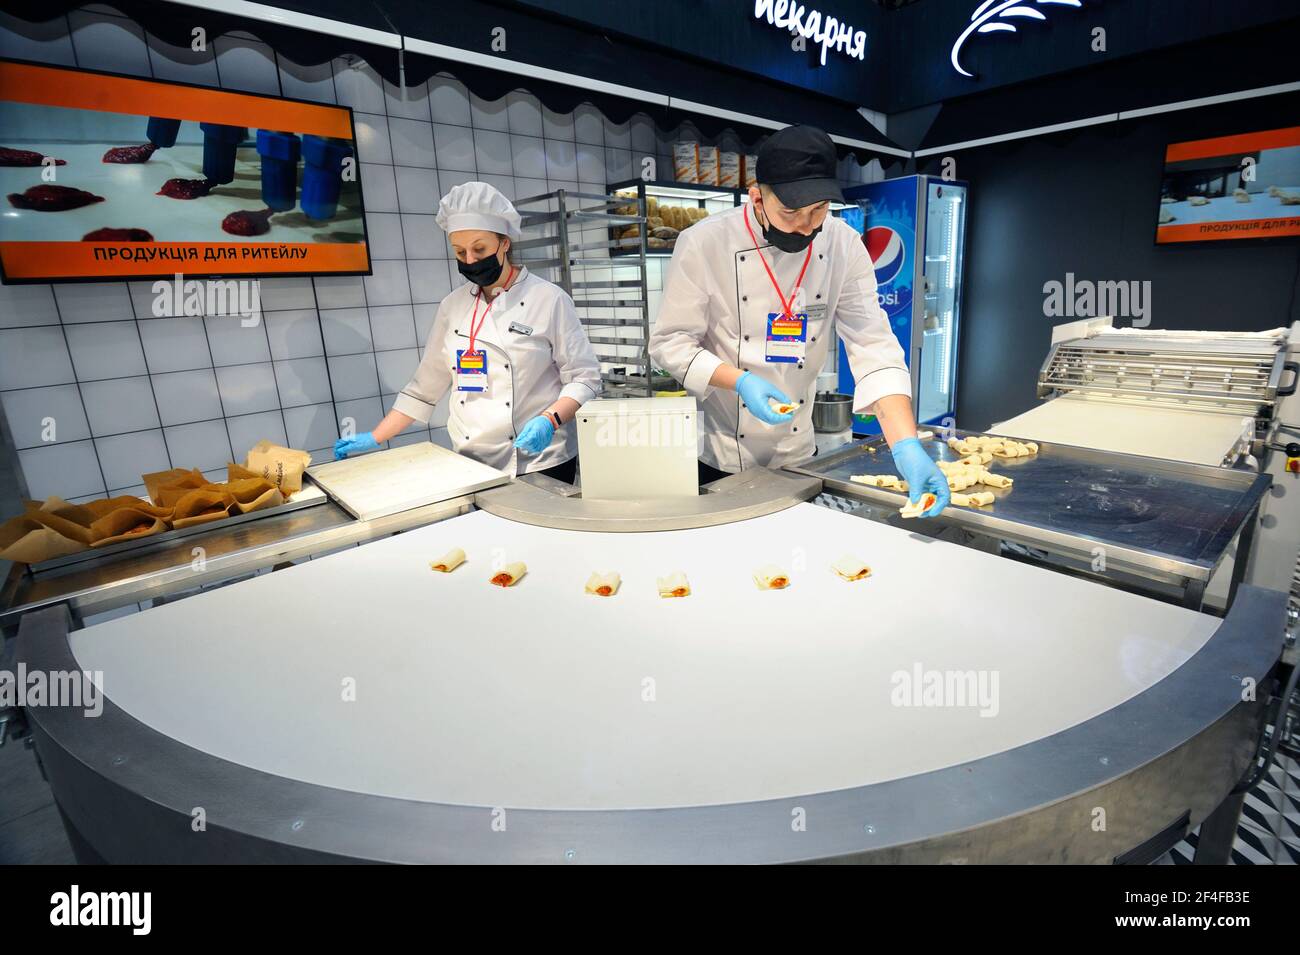 Two bakers making sweet rolls using an automatic bakery production line and dough flattening roller. Mini bakery. March 16, 2021. Berezovka, Ukraine Stock Photo